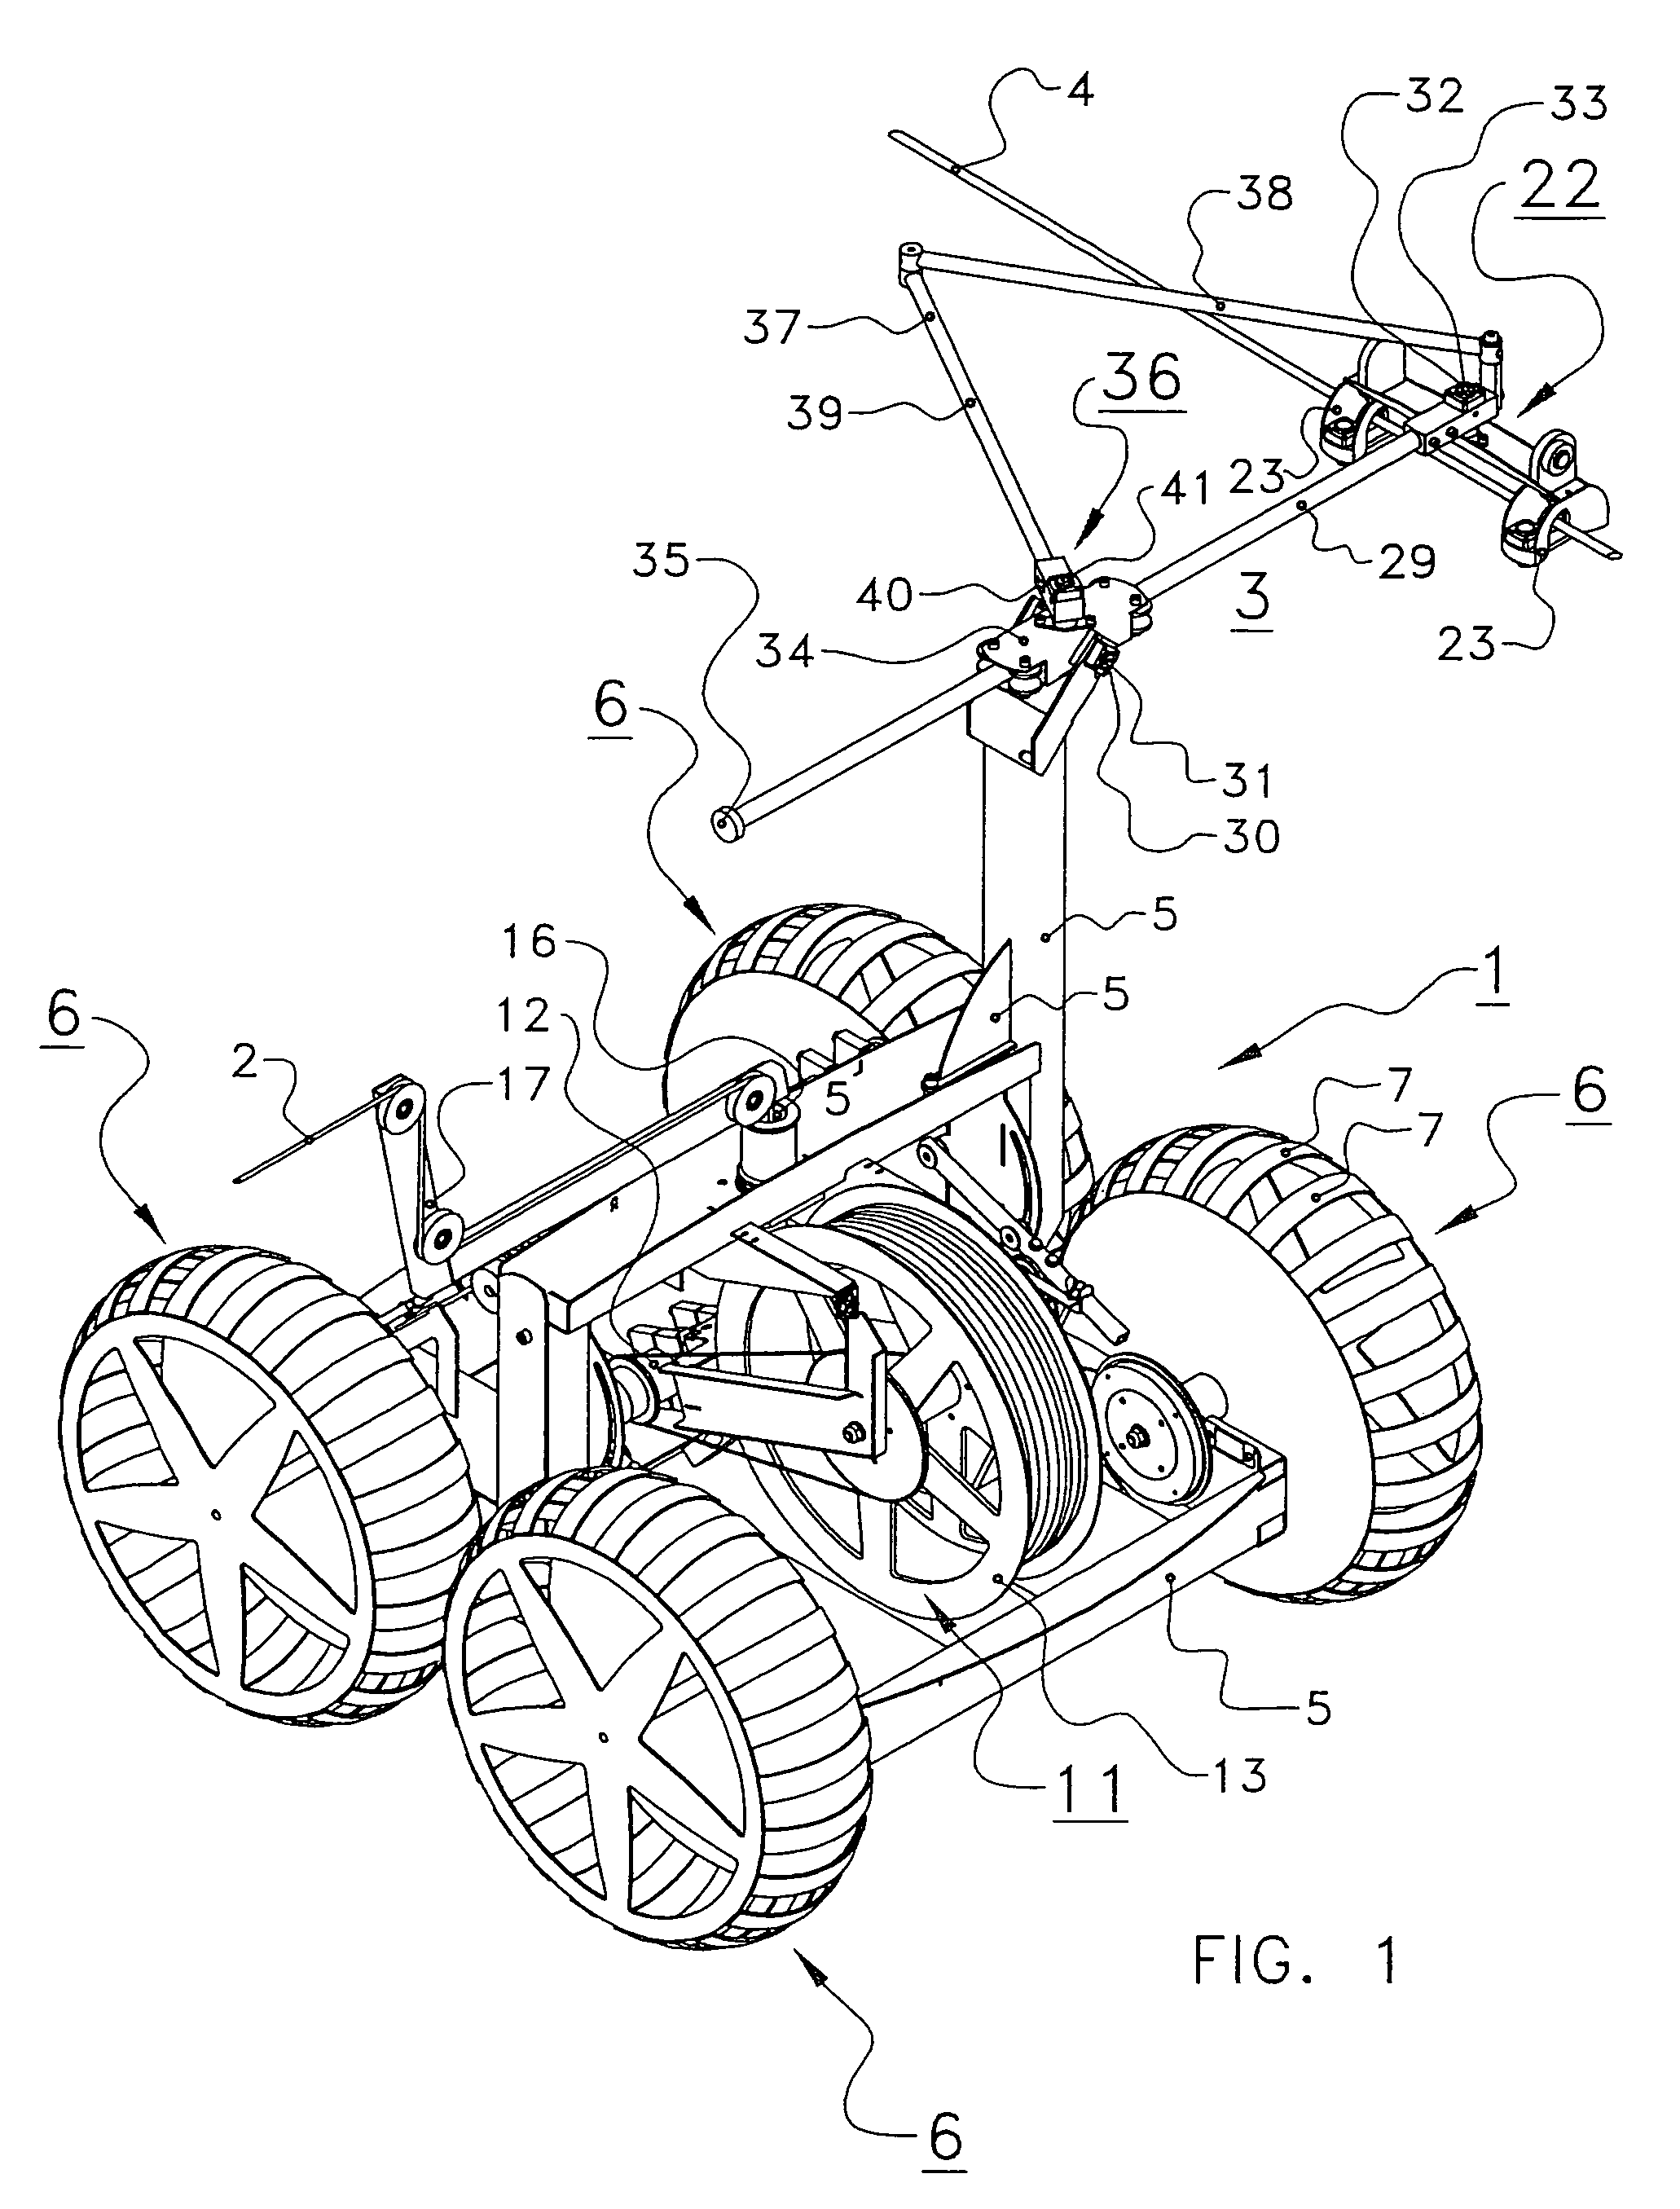 Device for demarcating an area